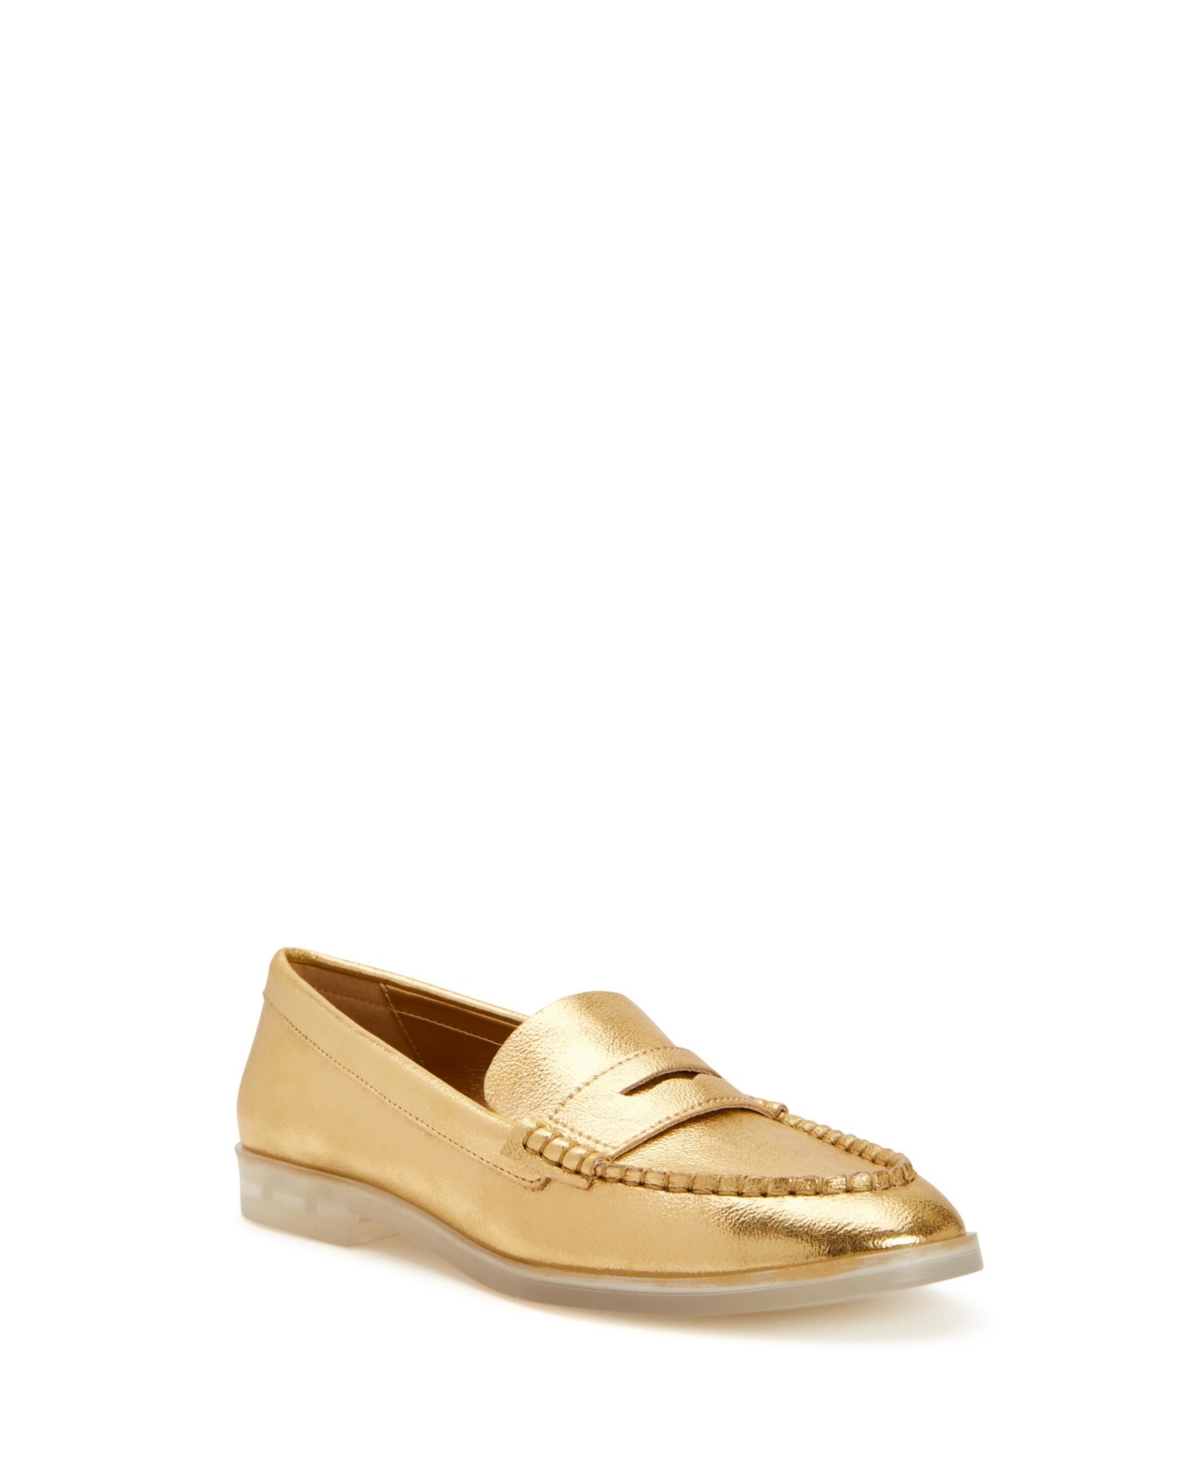 Katy Perry Women's The Geli Penny Loafers Shoes Women's Shoes In Gold ...